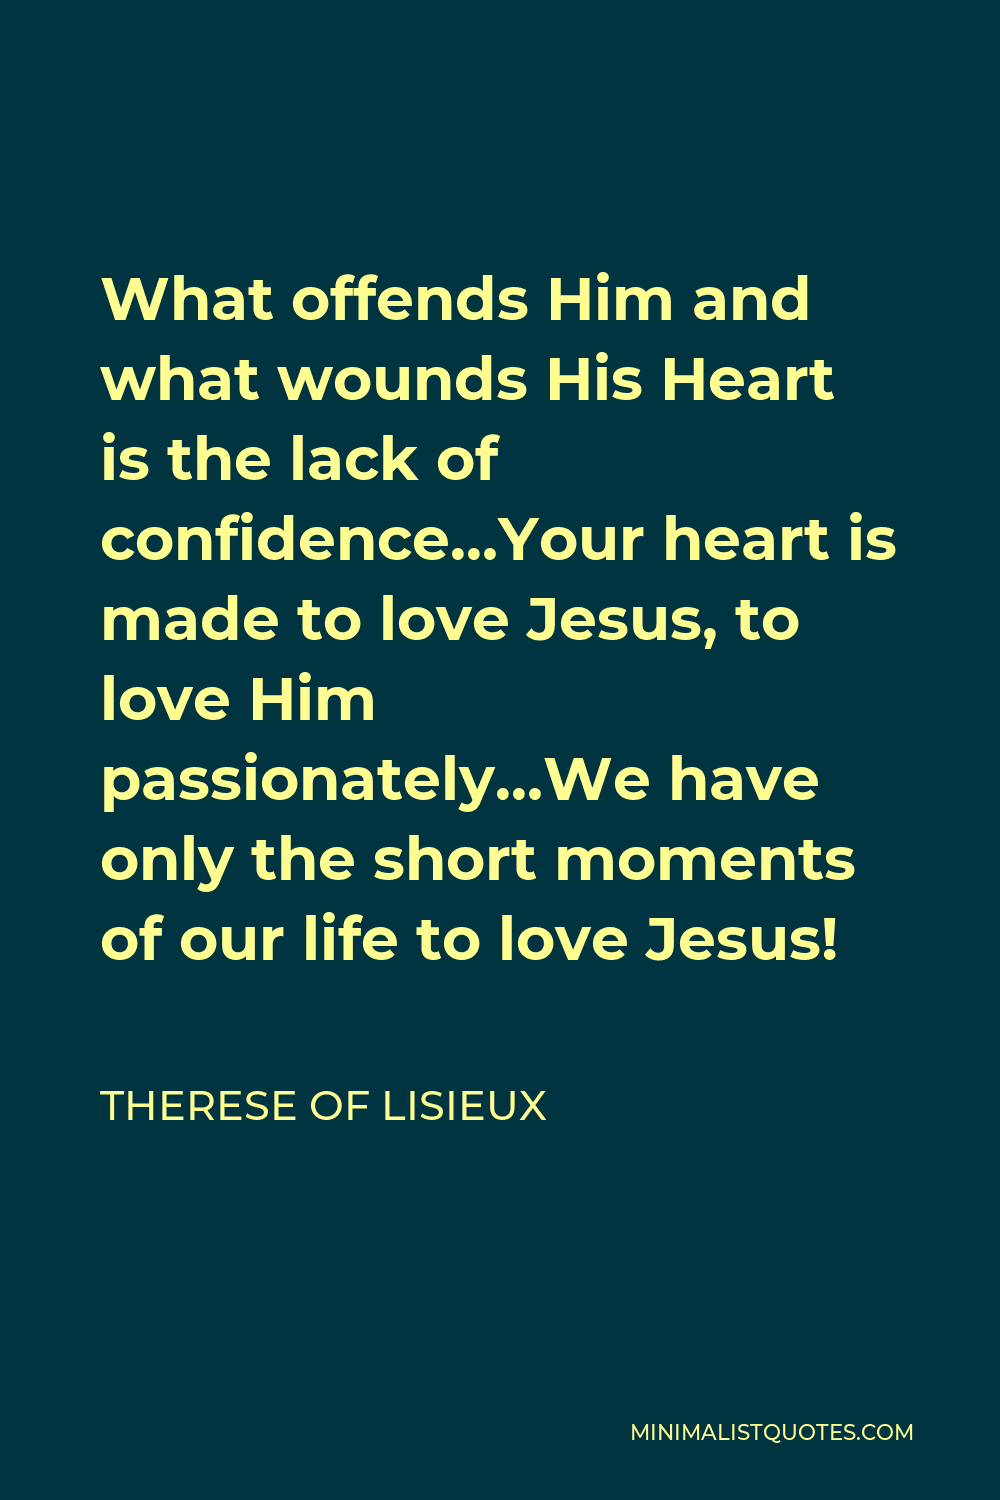 Therese of Lisieux Quote - What offends Him and what wounds His Heart is the lack of confidence…Your heart is made to love Jesus, to love Him passionately…We have only the short moments of our life to love Jesus!